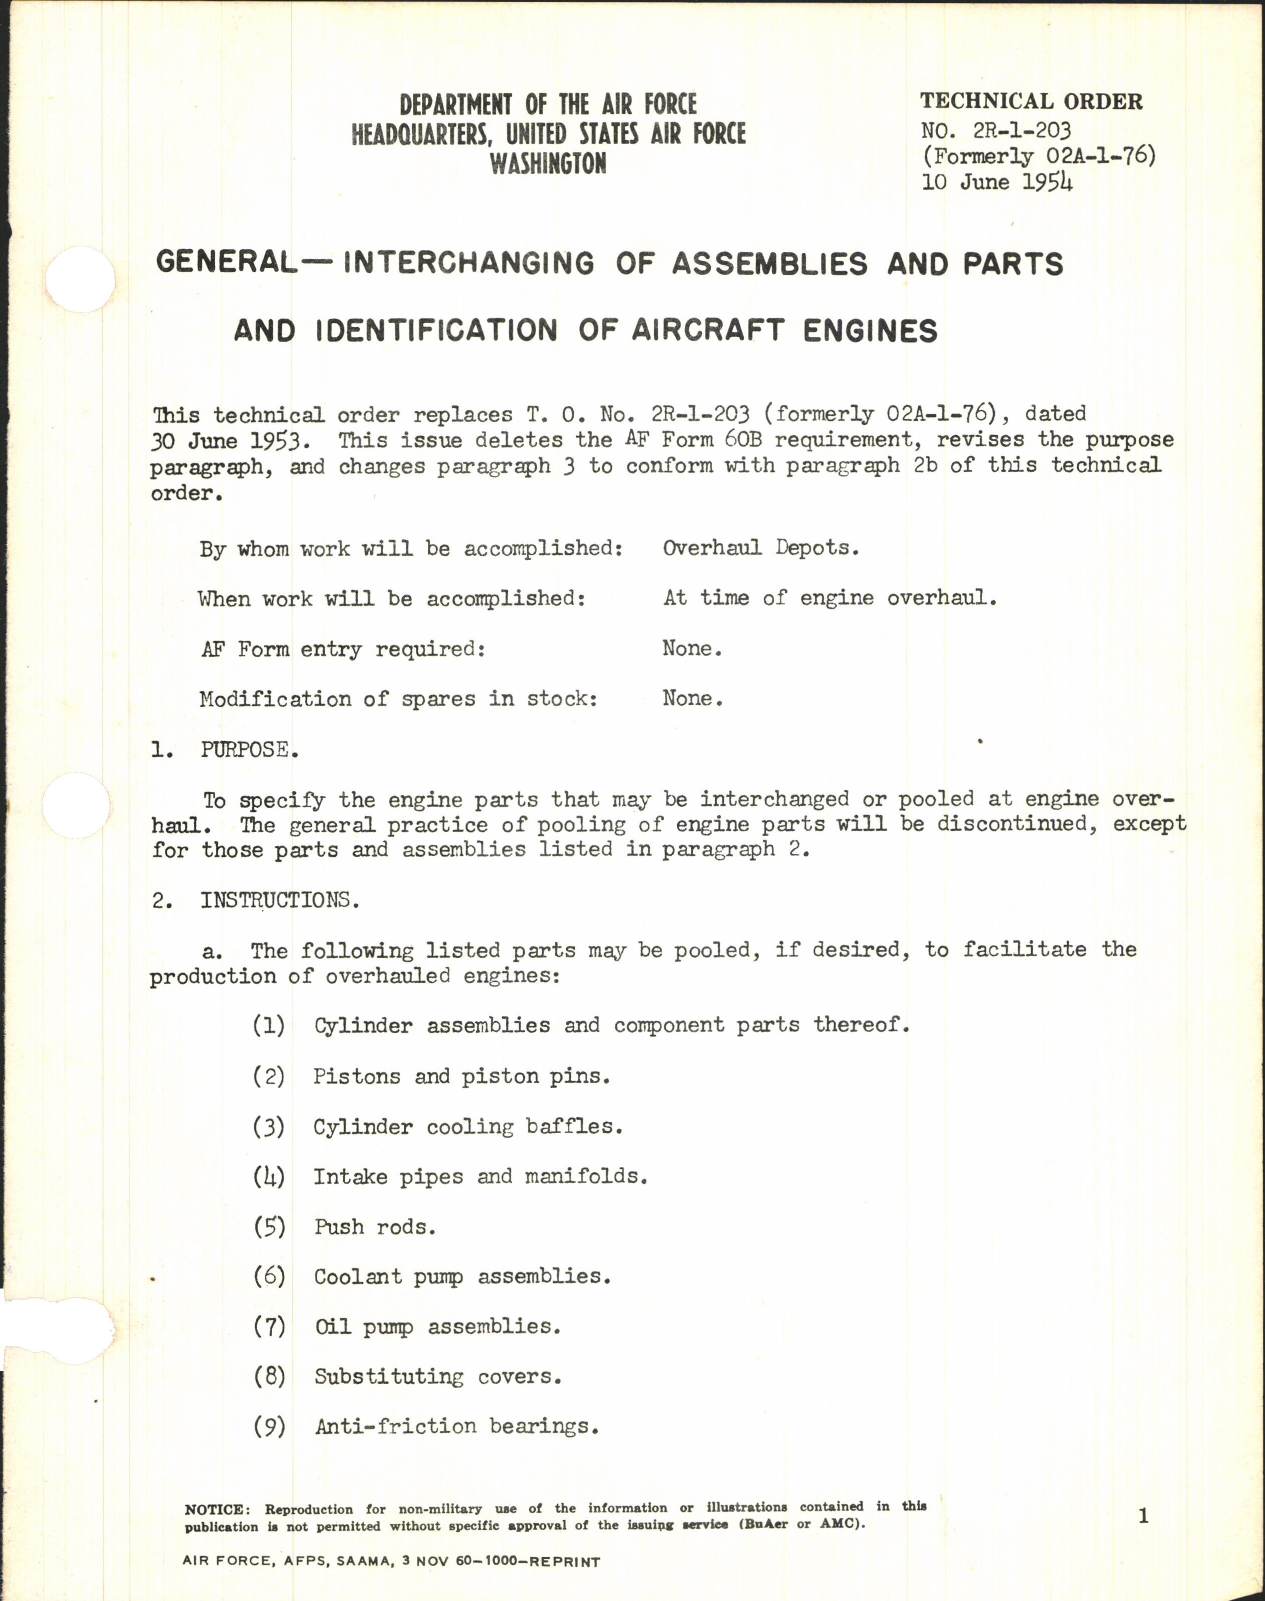 Sample page 1 from AirCorps Library document: Interchanging of Assemblies and Parts and Identification of Aircraft engines